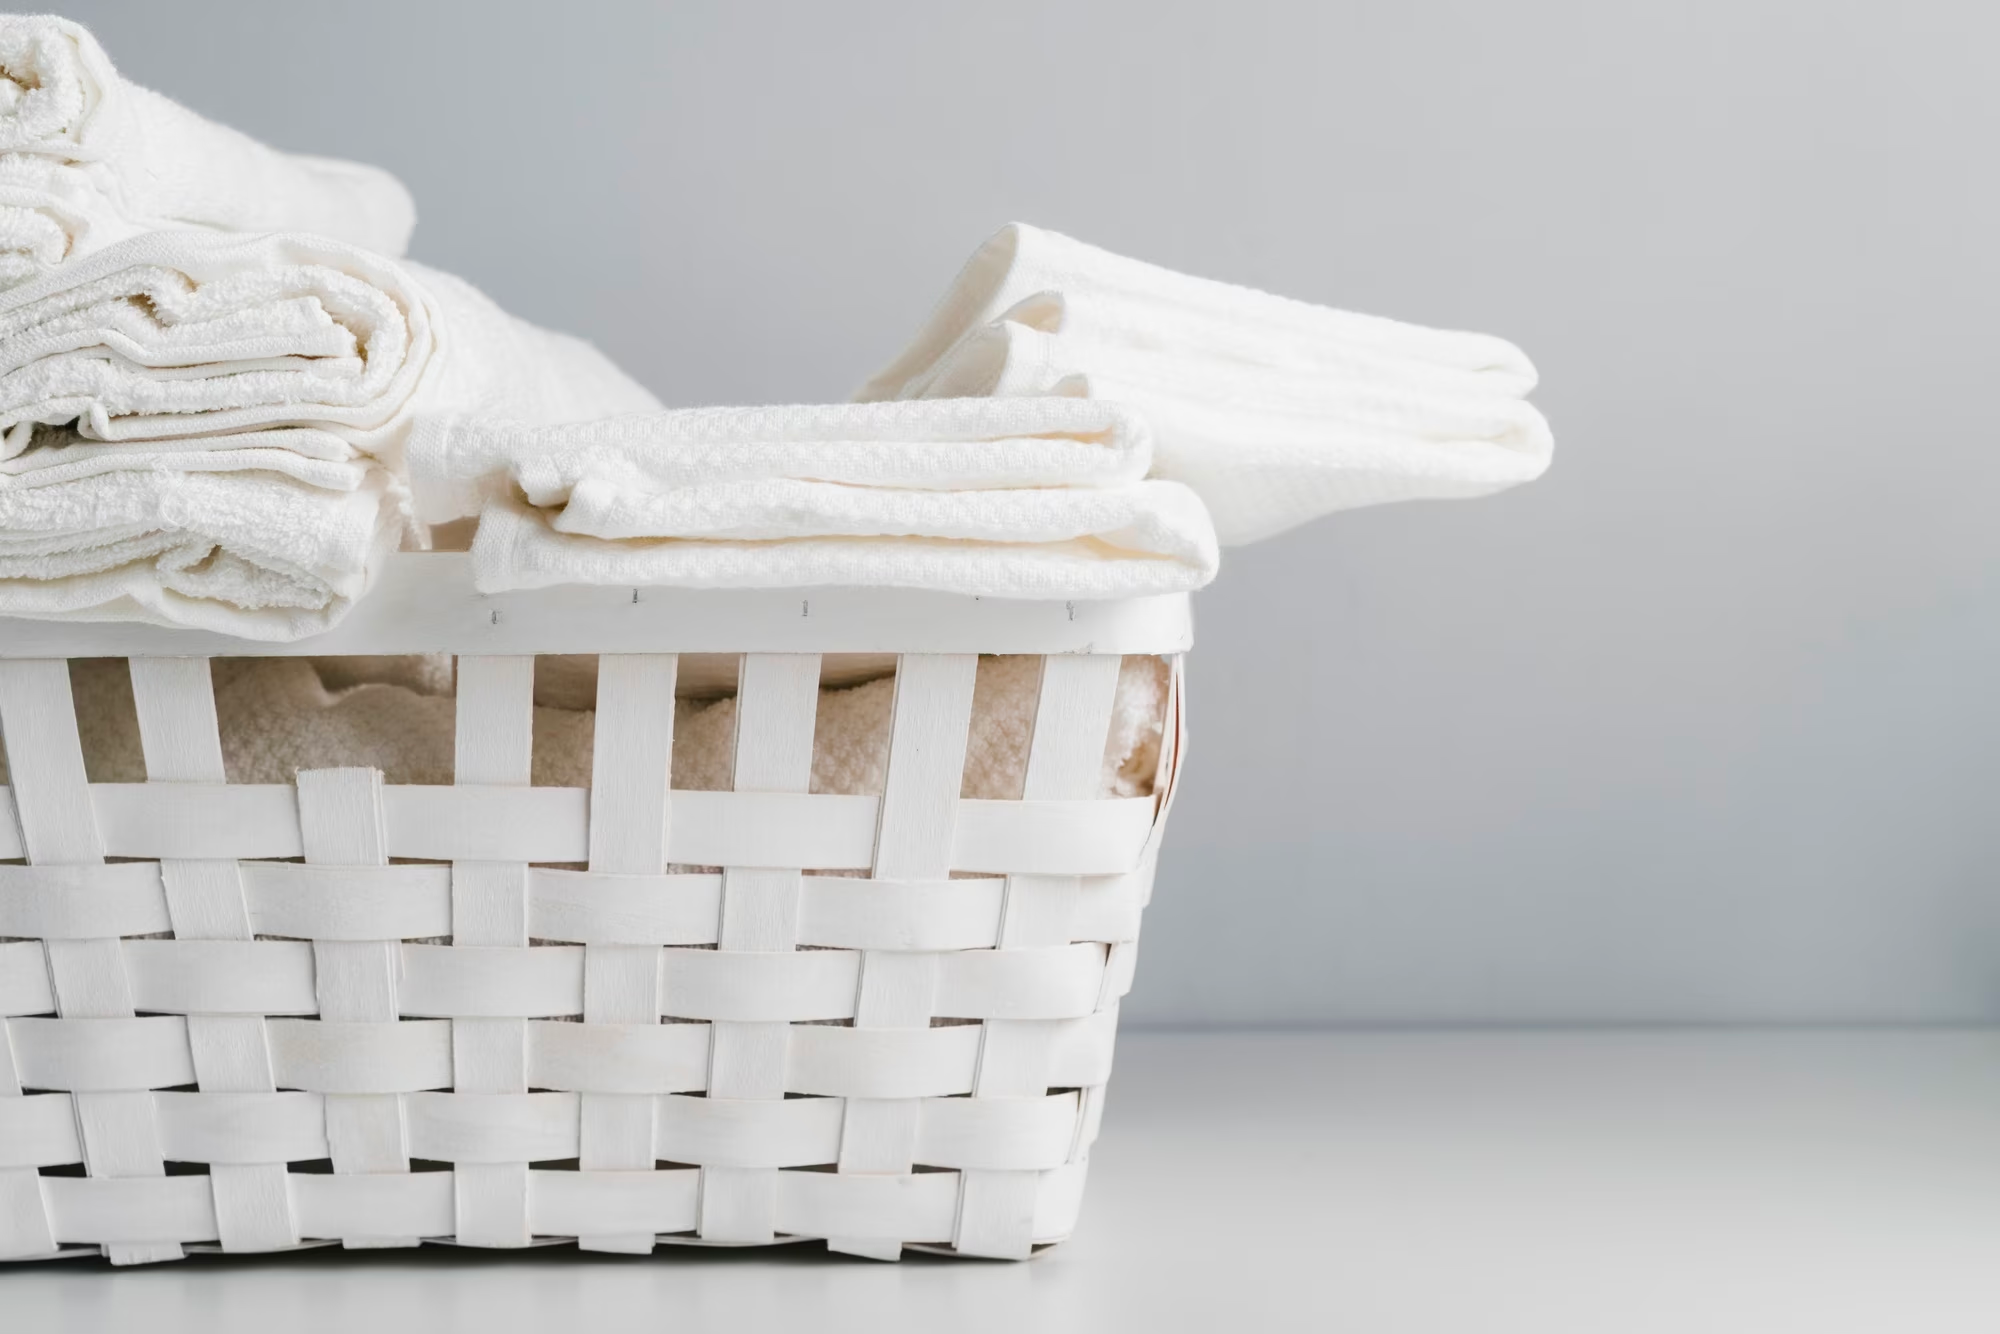 What Are Laundry Detergent Sheets and Why Use Them?